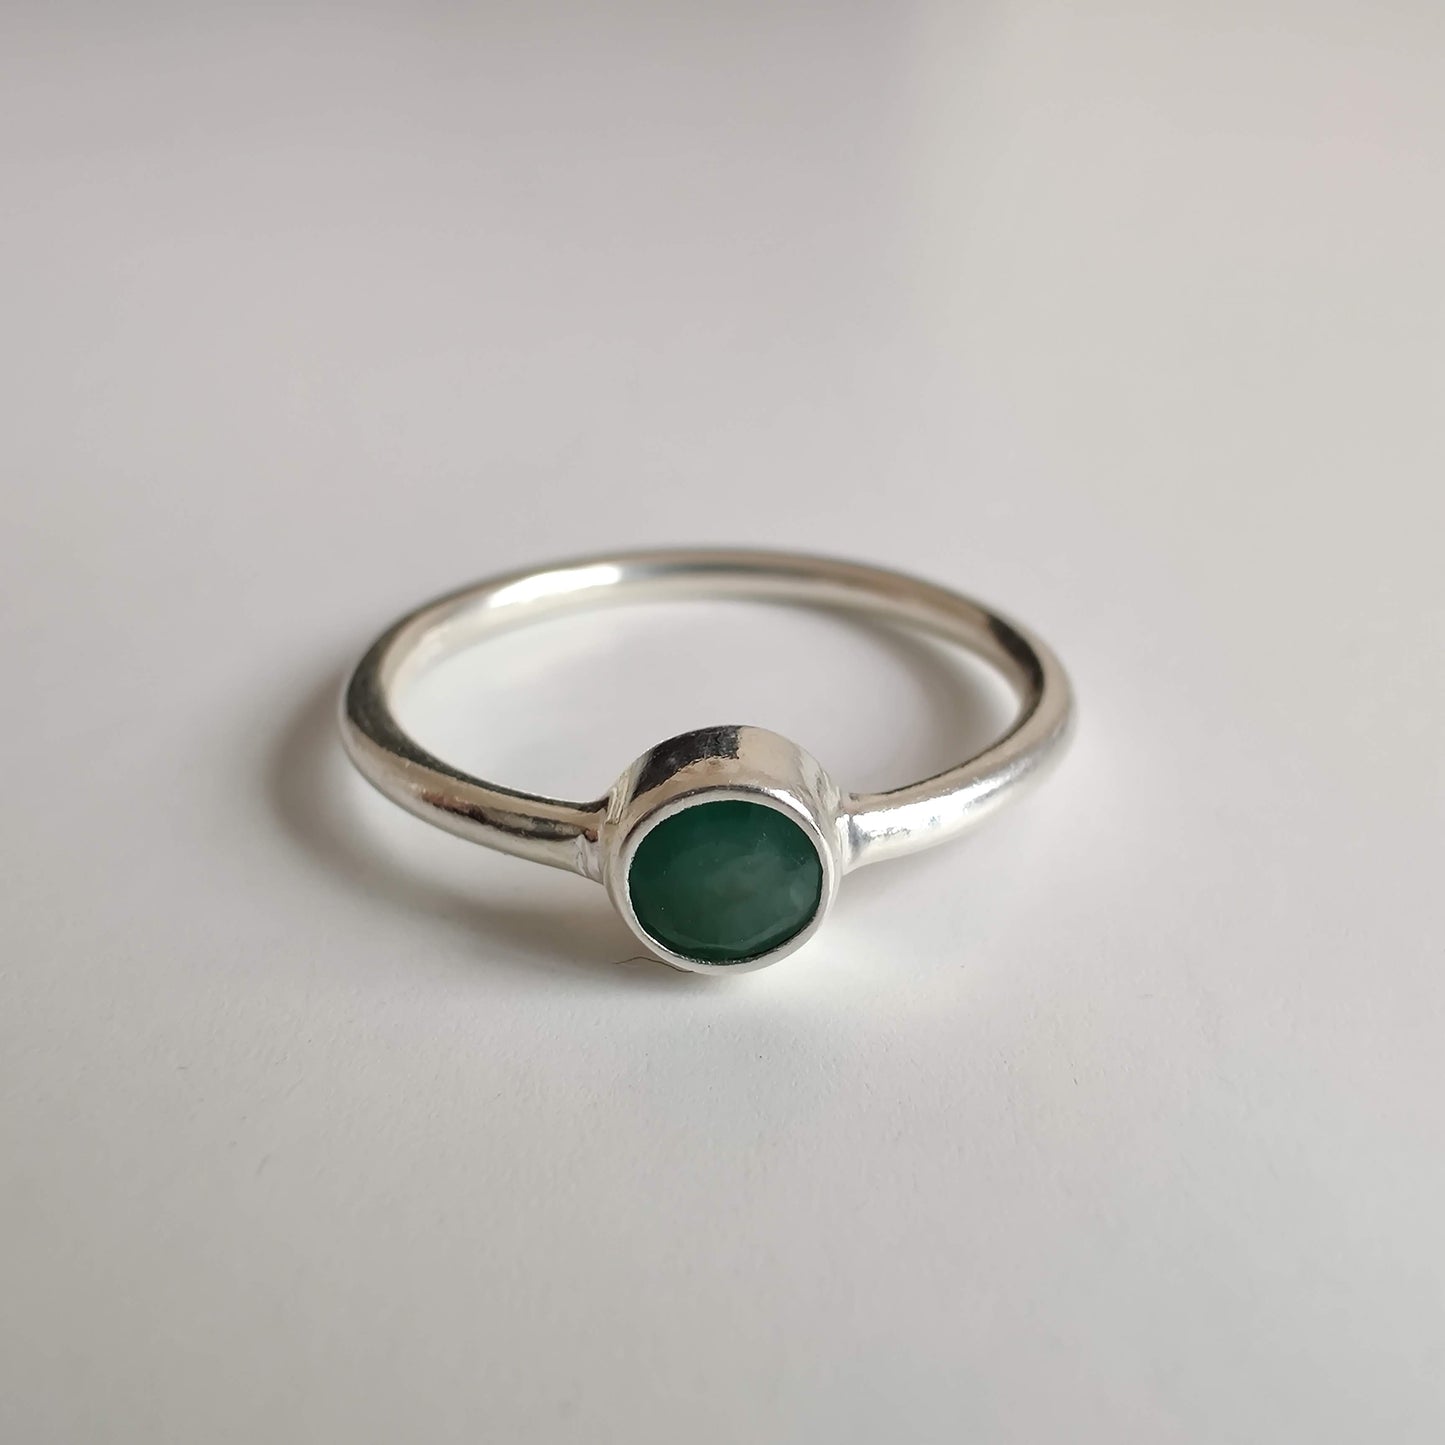 Emerald Delicate 925 Sterling Silver Ring - Rivendell Shop